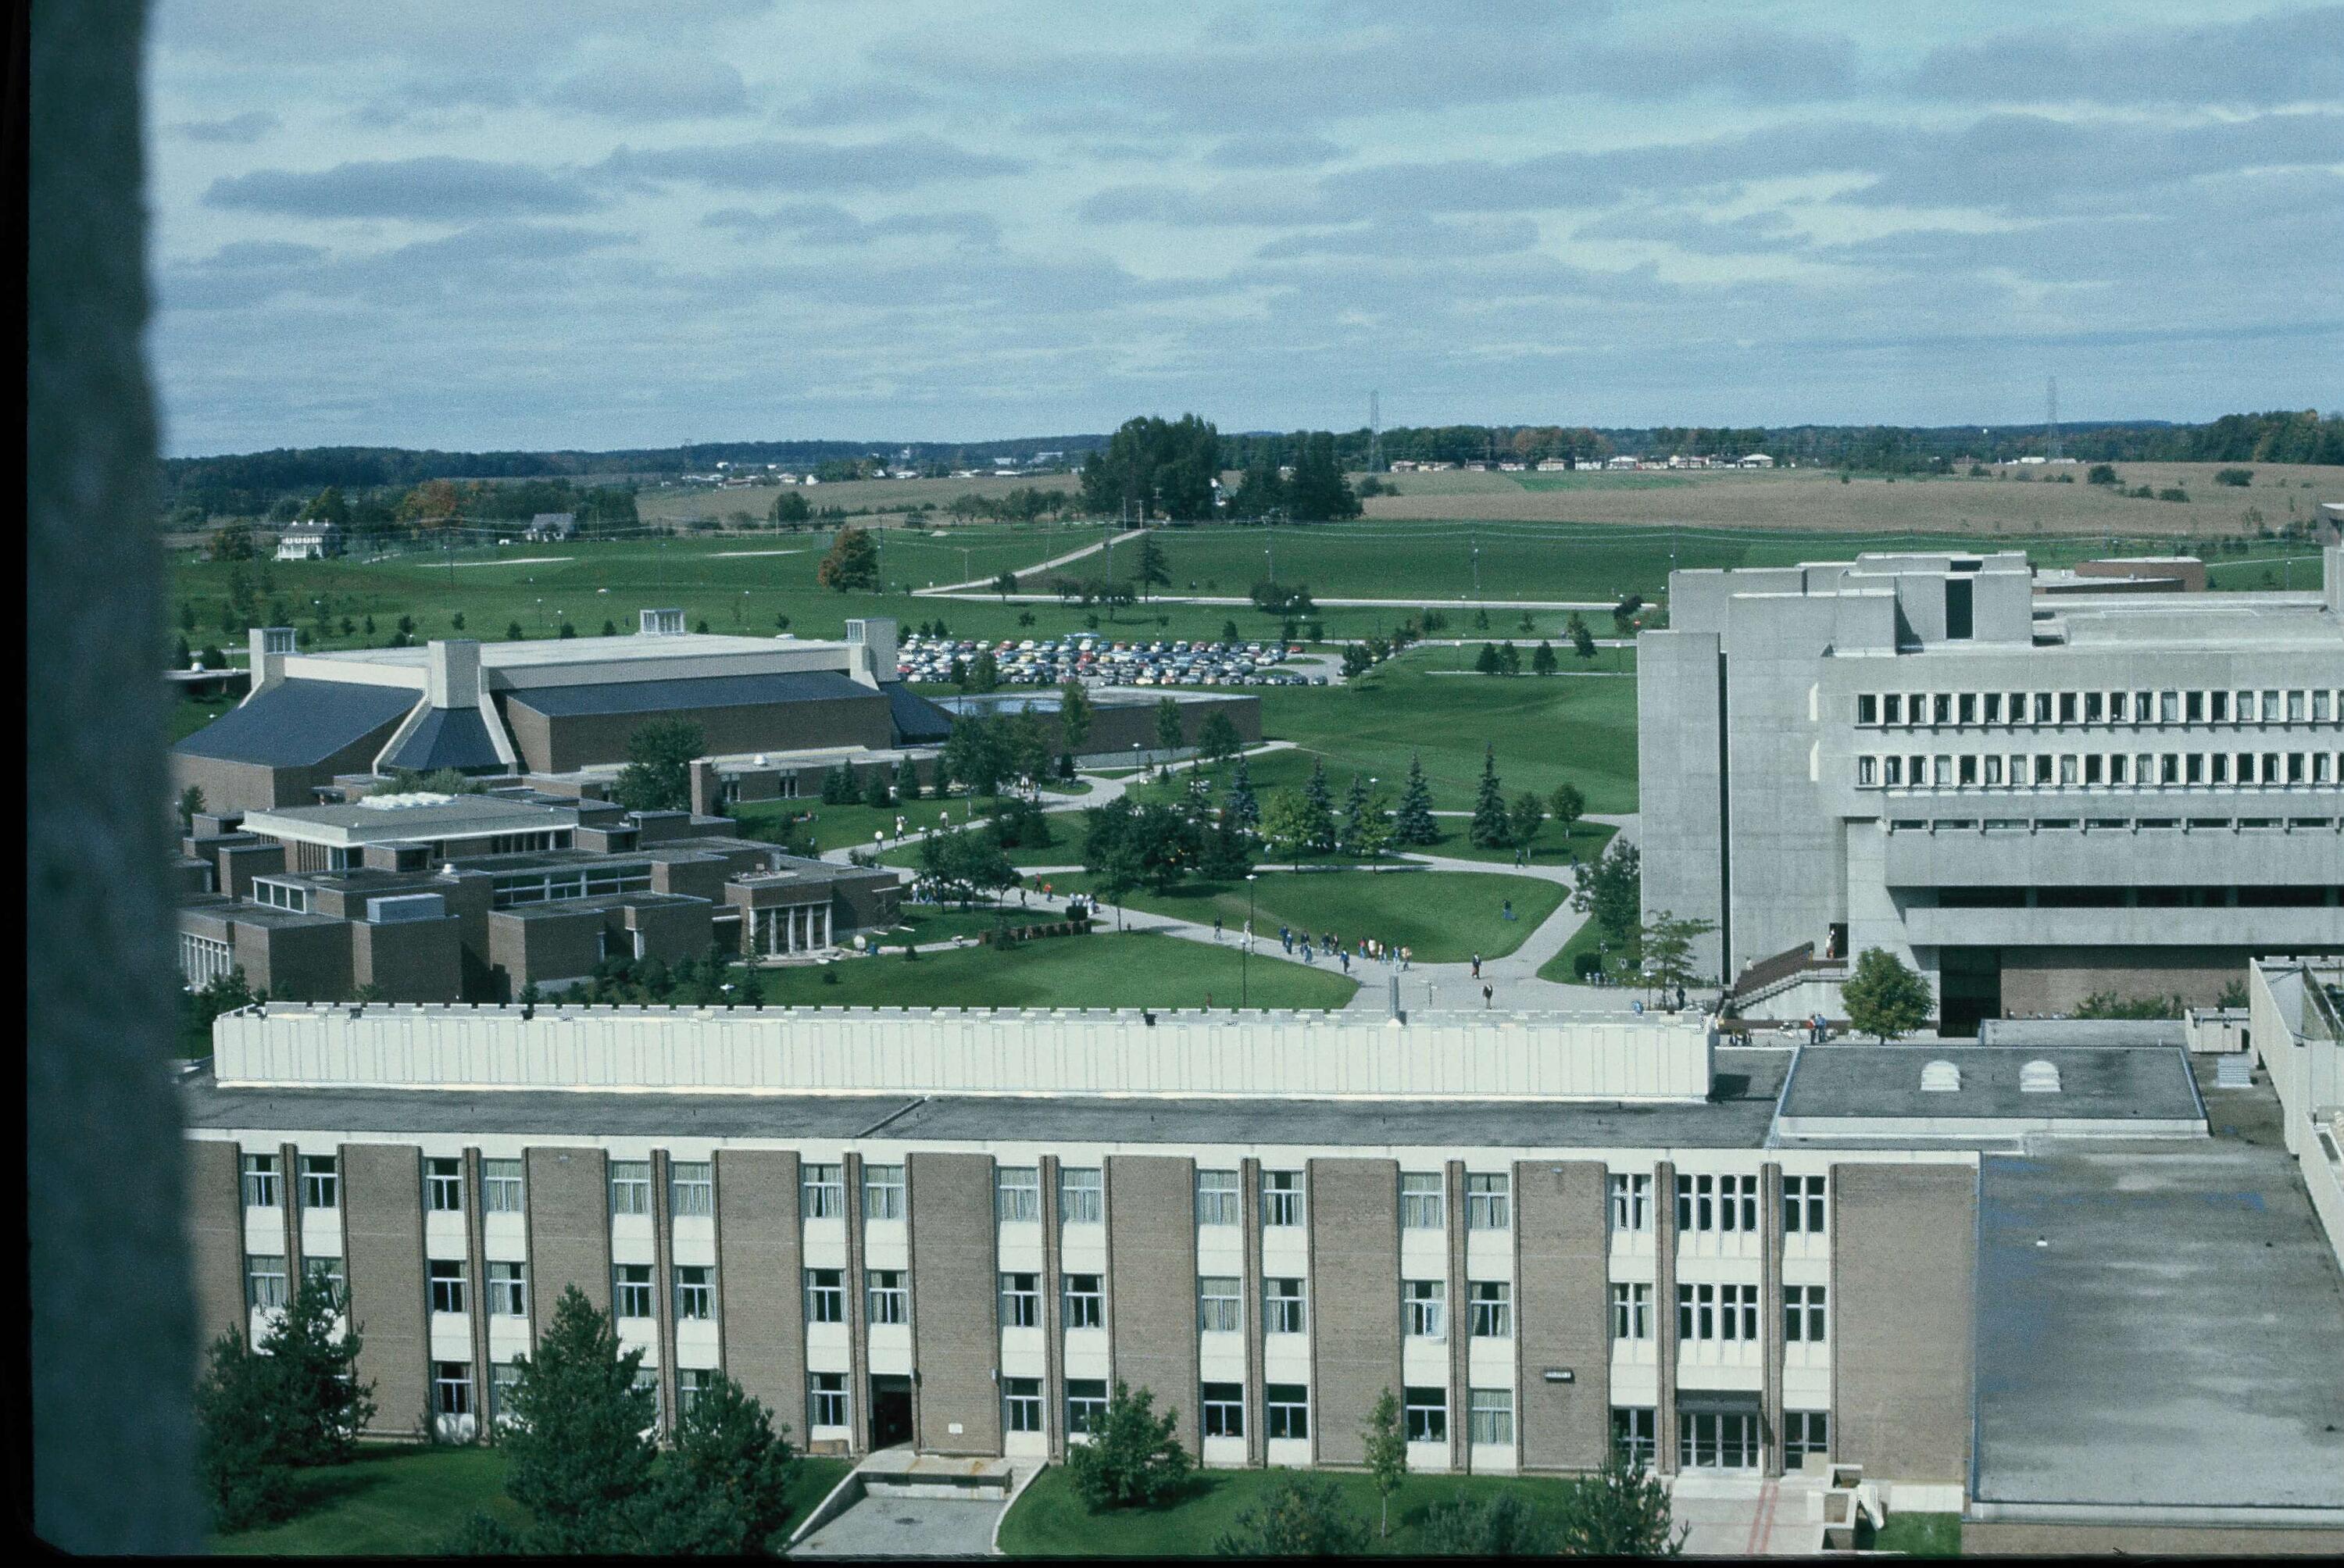 The view of North campus in 1977